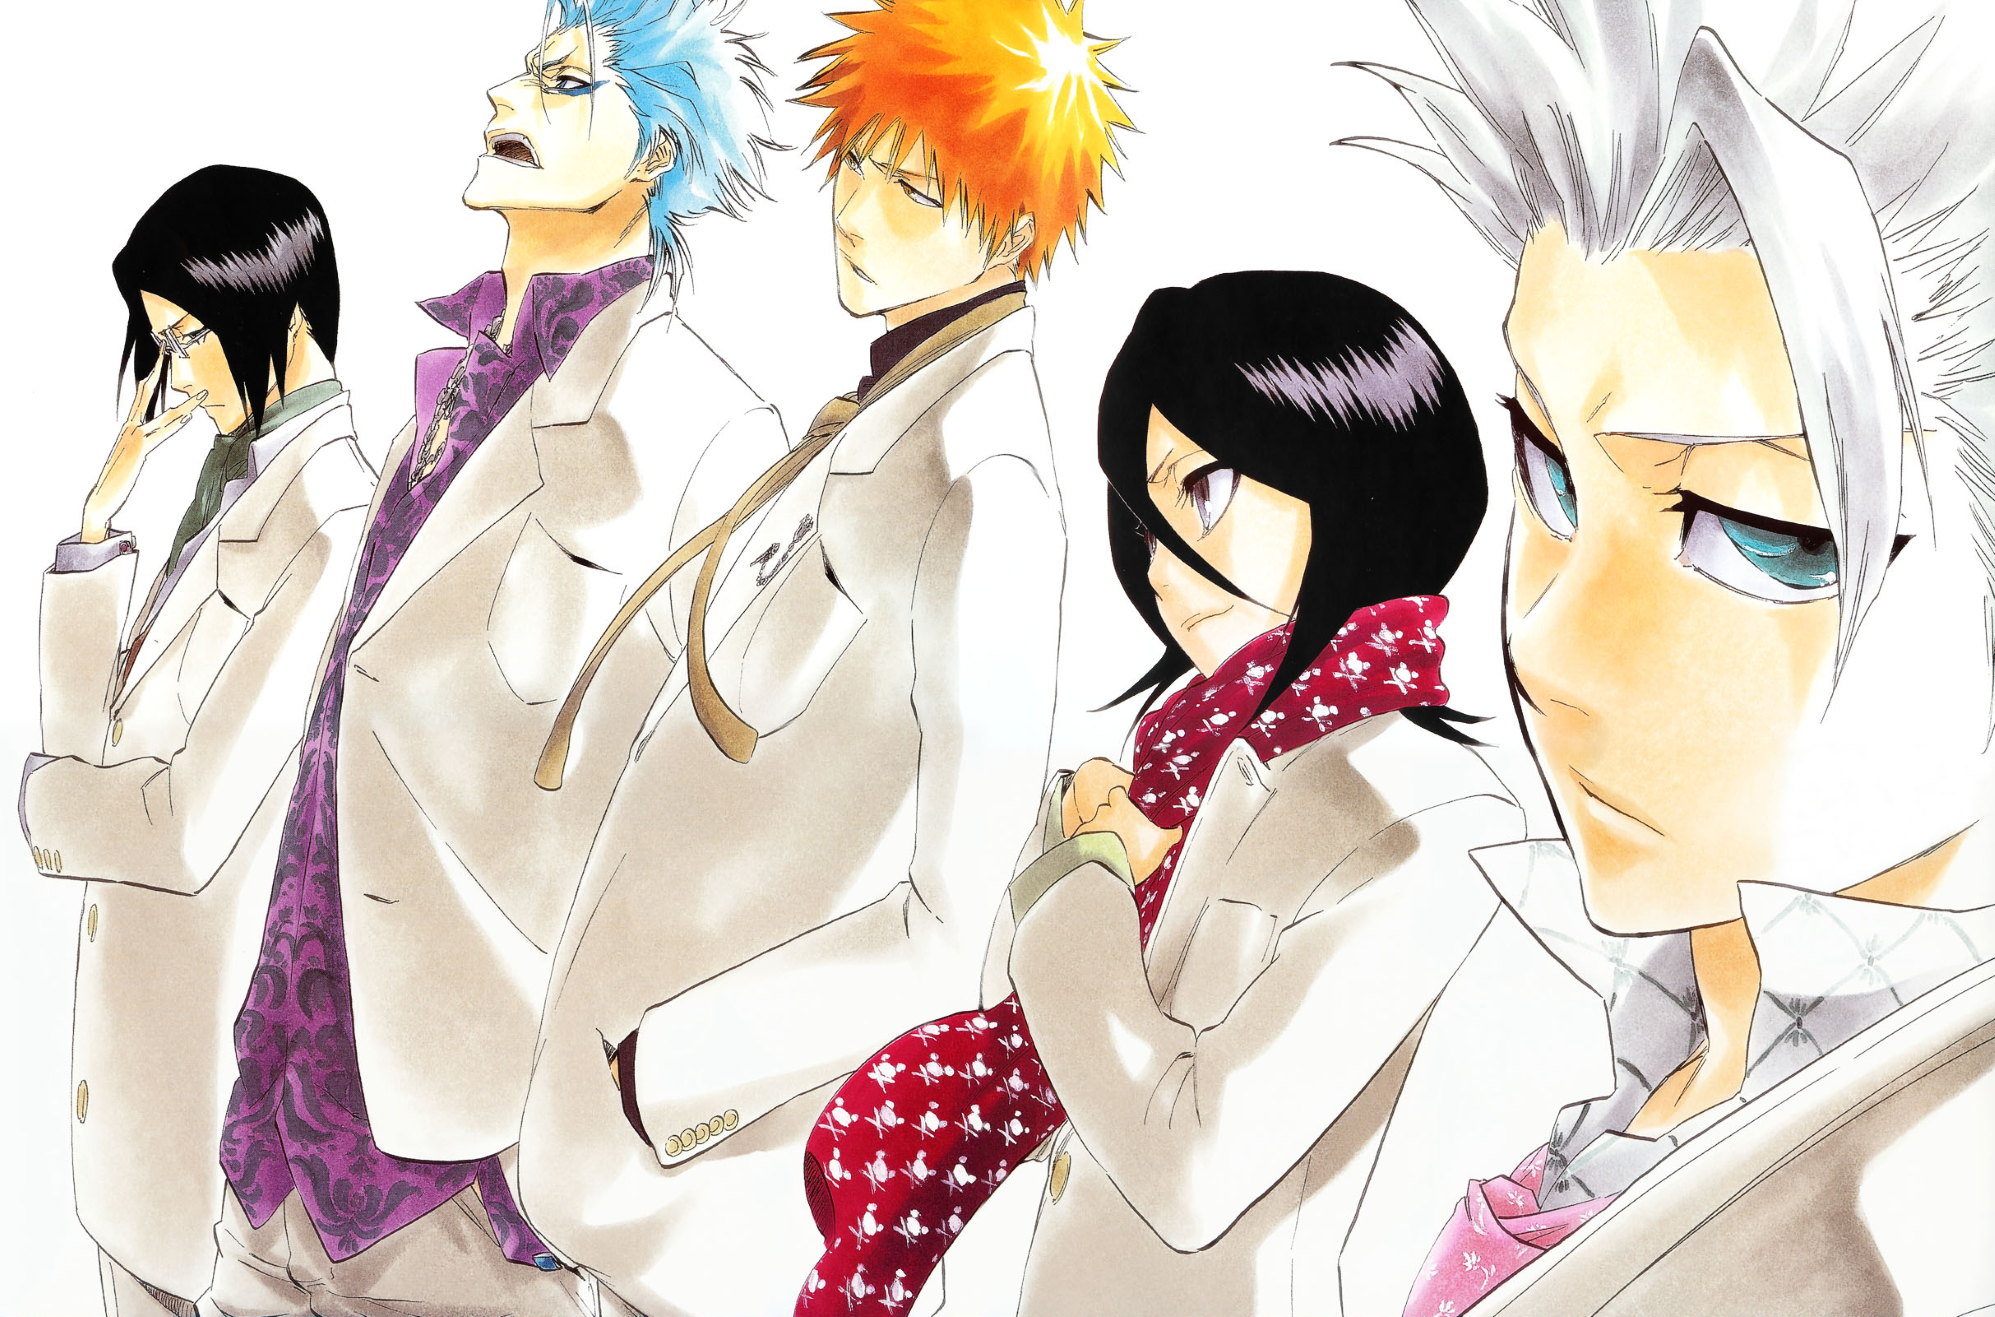 Bleach - Popular Anime and manga Series - Episodes, Characters